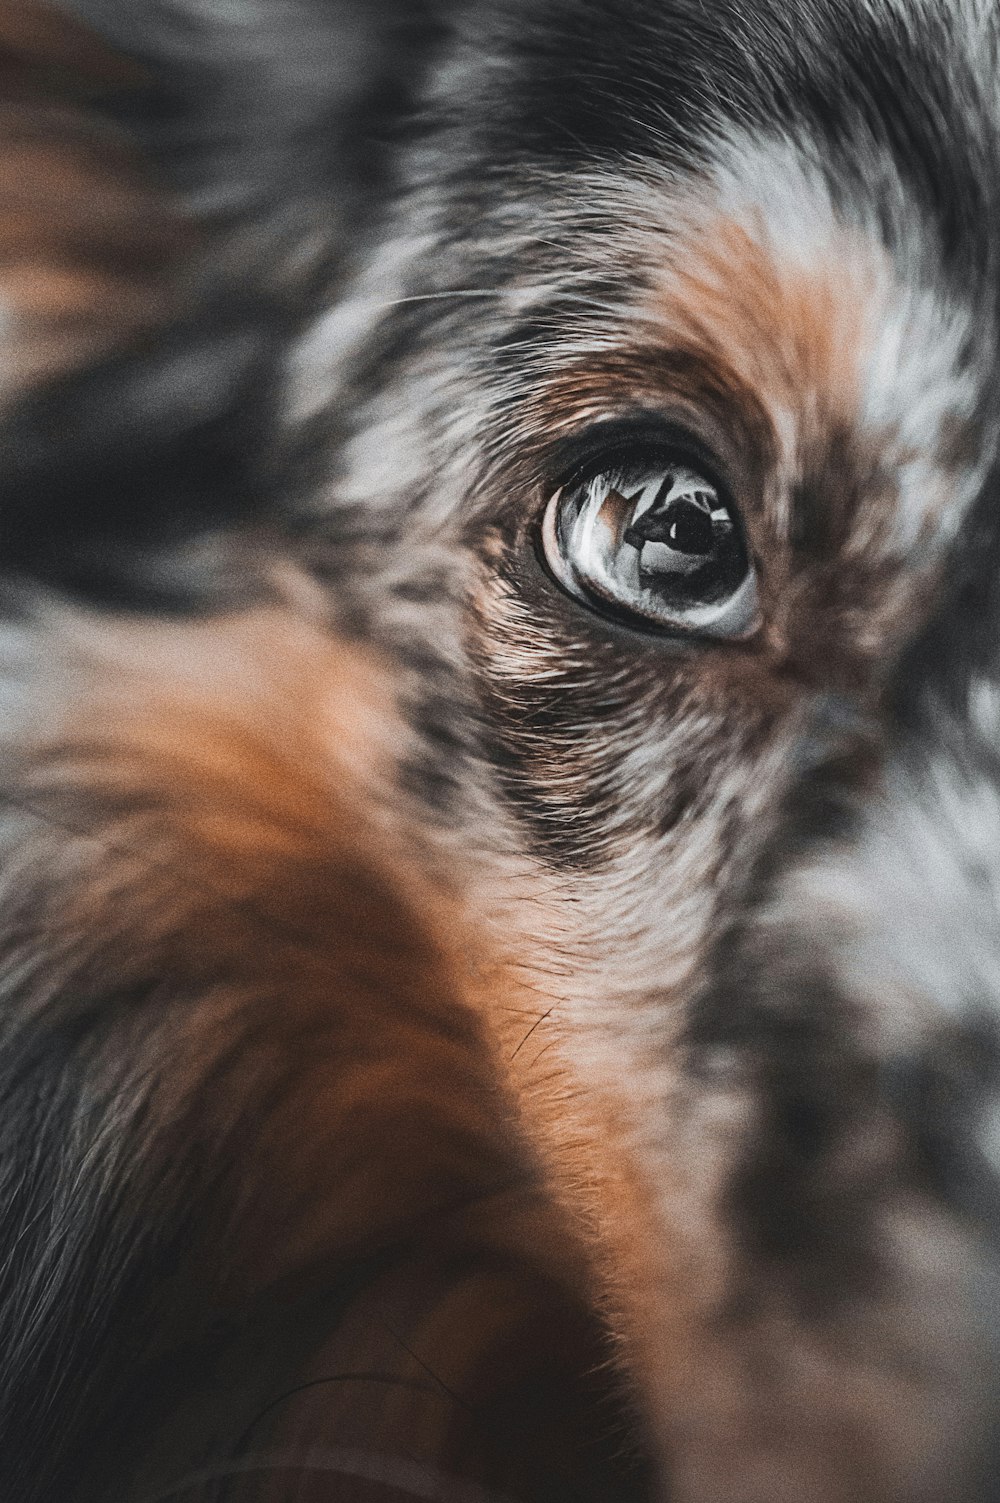 a close up of a dog's eye with a blurry background